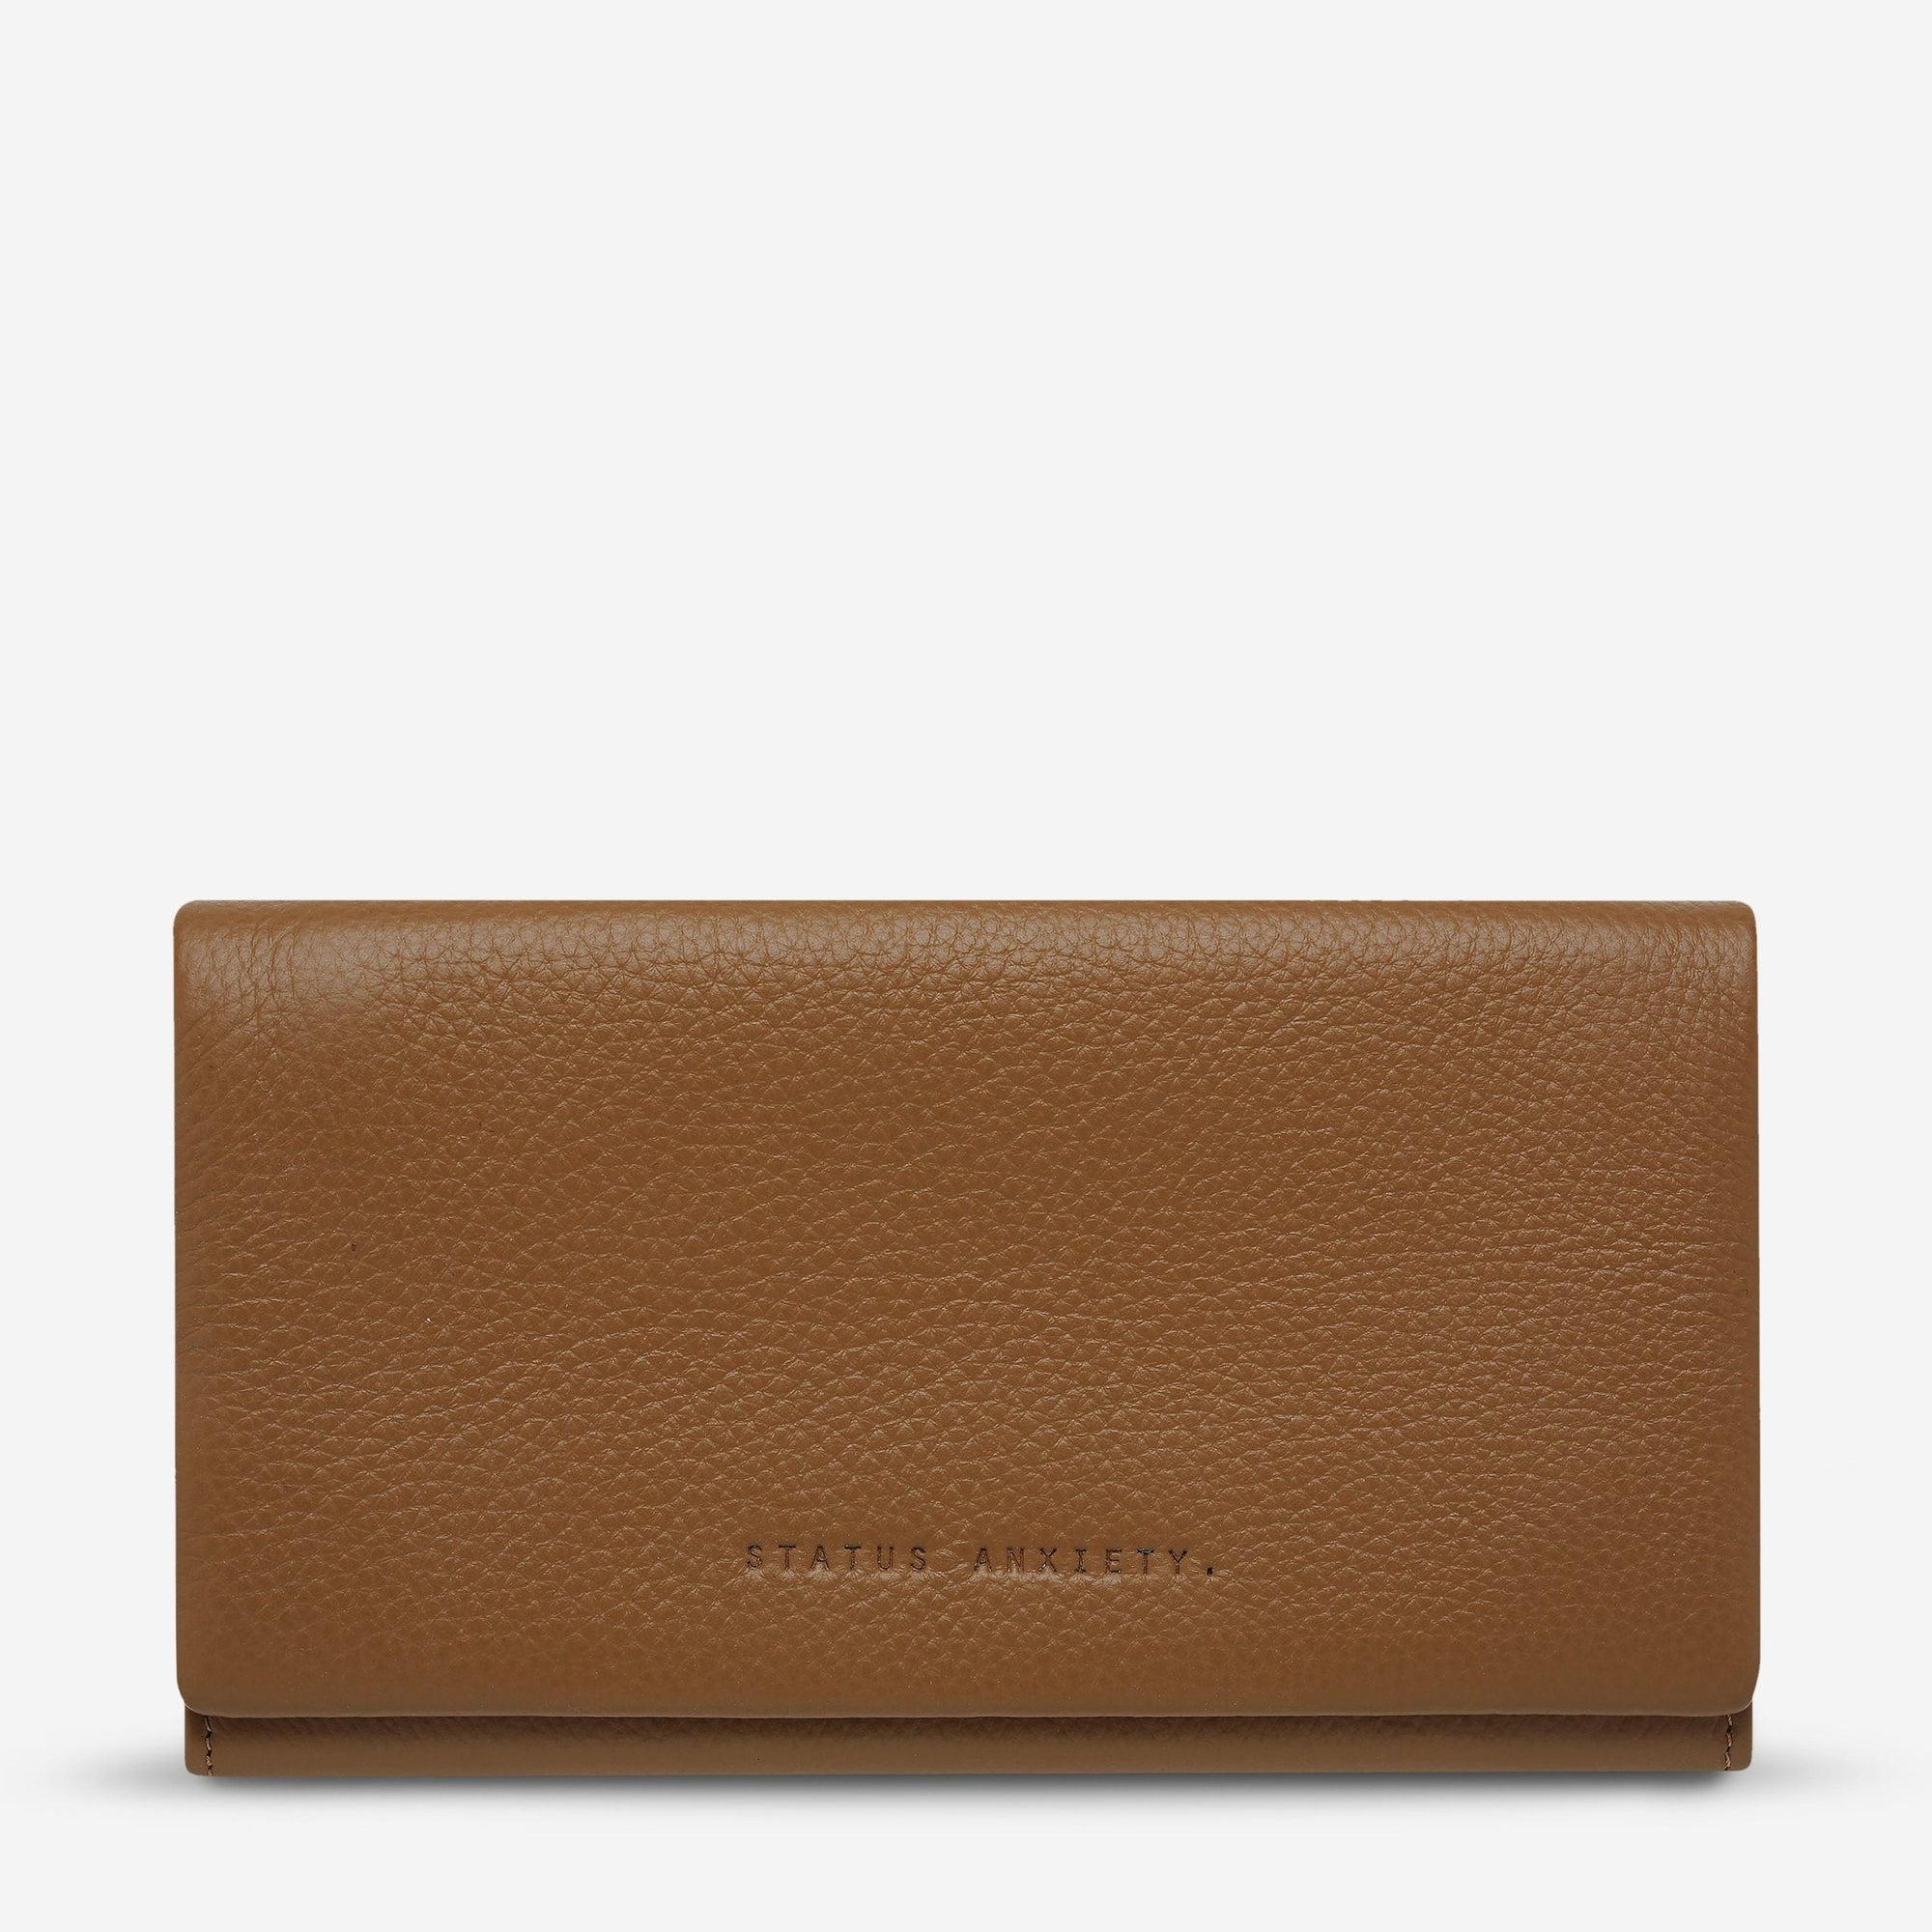 Status Anxiety Nevermind Leather Wallet Tan